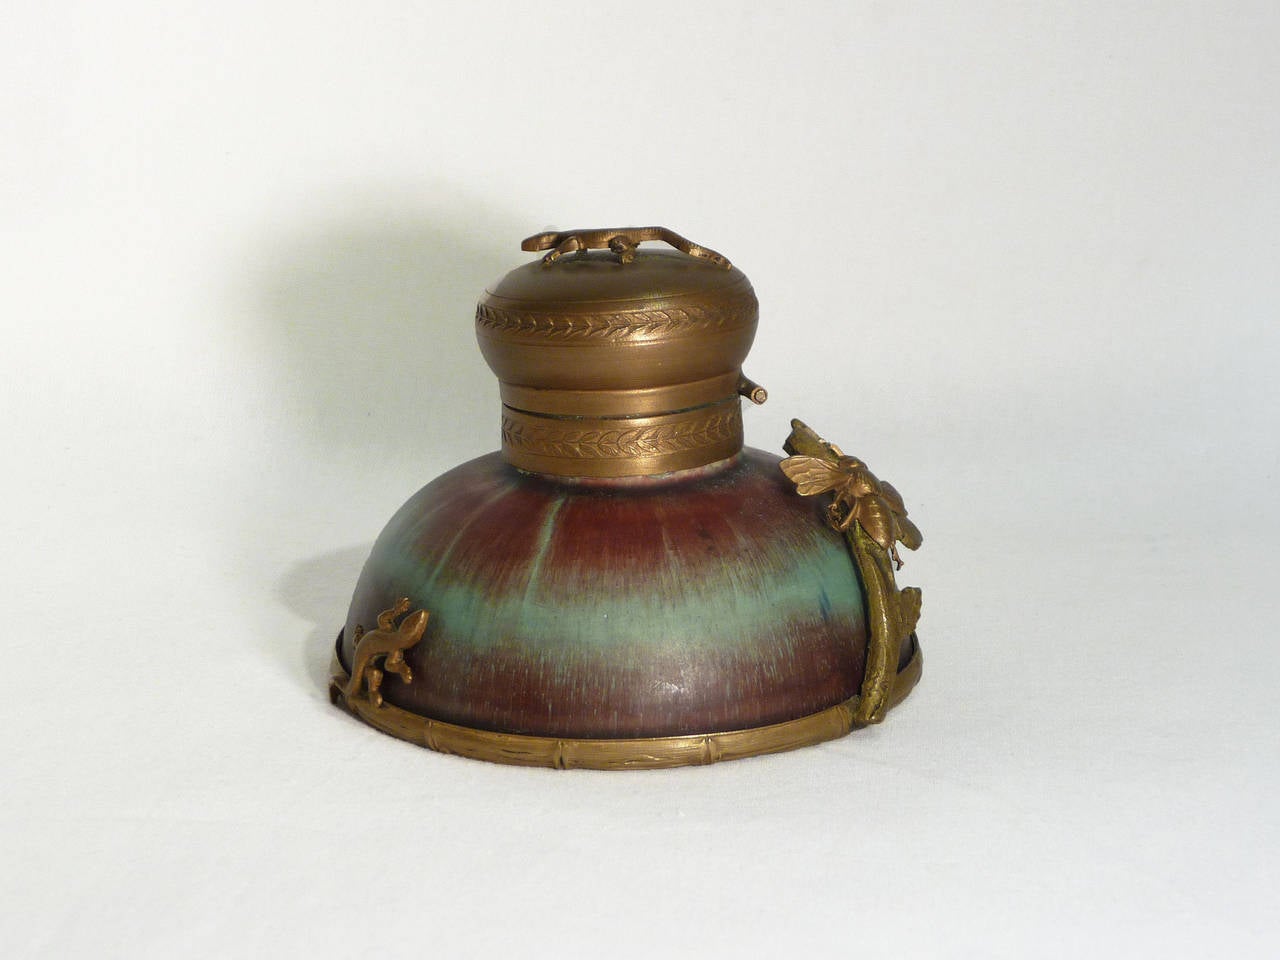 Eugene Baudin
An Art Nouveau Ceramic Inkwell
Bronze mount decorated with reptiles and insects
Original glass liner
Signed